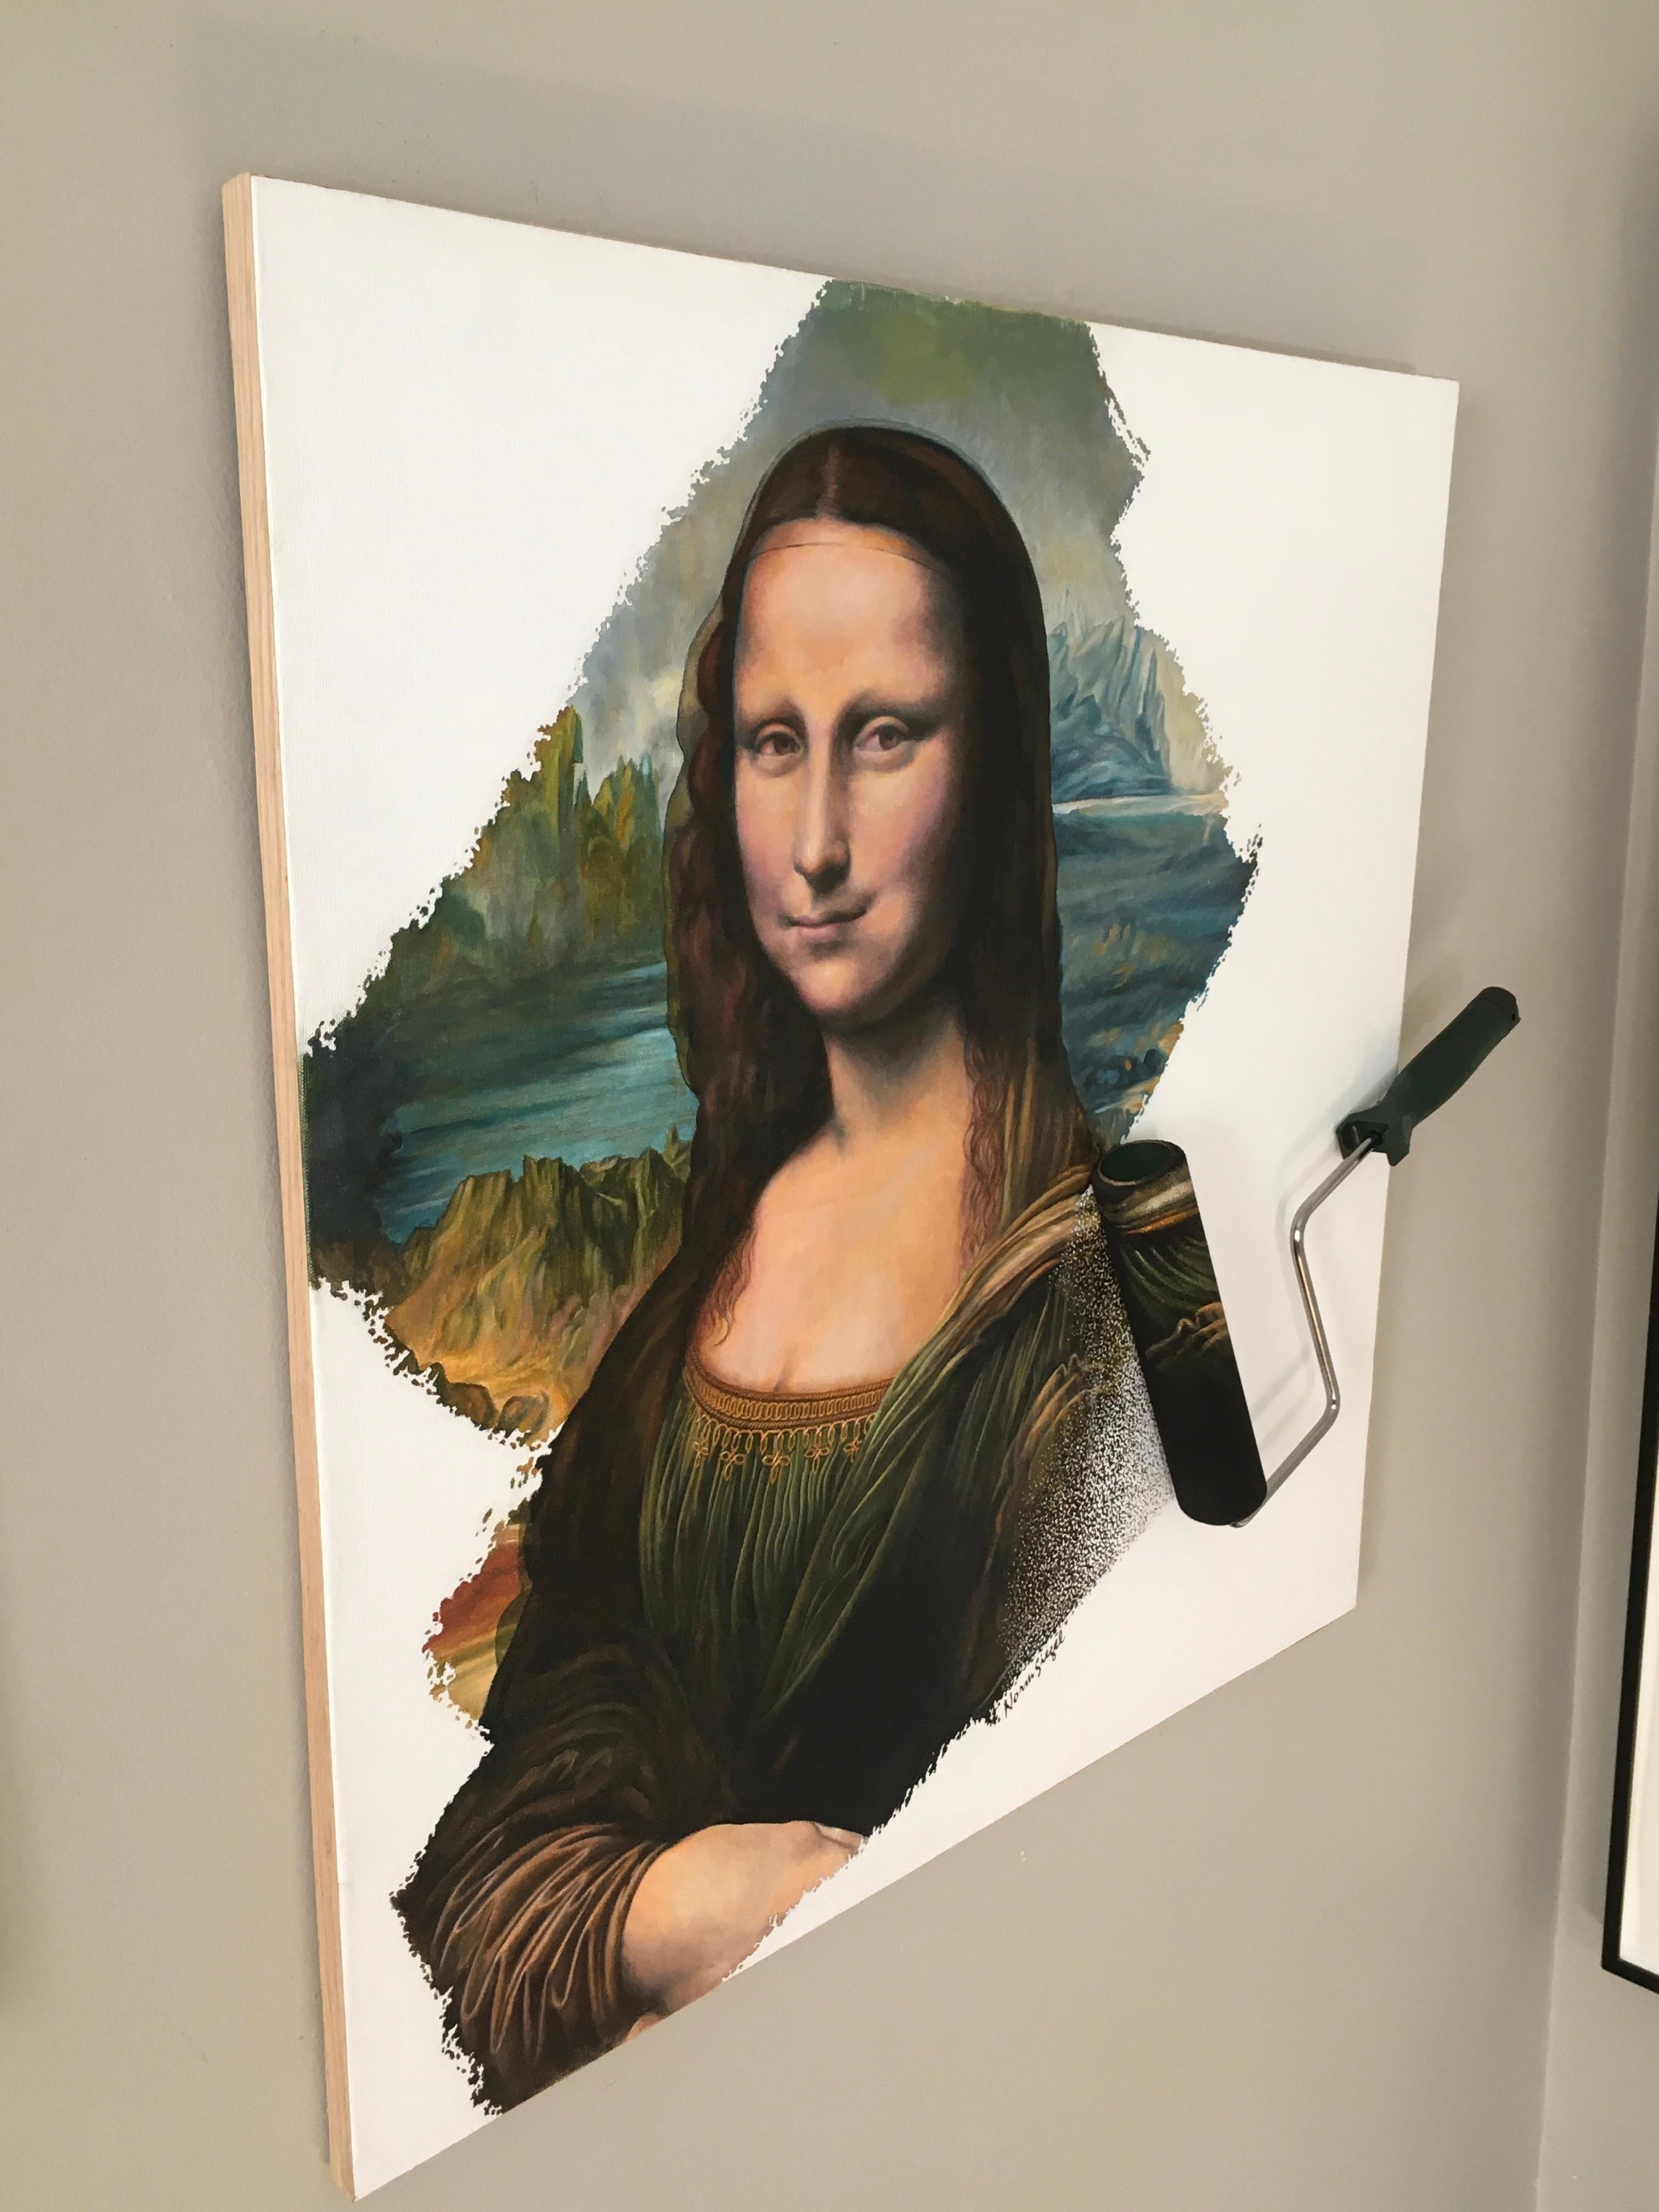 Mona Rolla, is a photorealistic version of the Mona Lisa created by Leonardo da Vinci.  This version by Norm Siegel contains portions of the original painting and a paint roller.  It is oil on canvas.  It is 30x34.  The Mona Lisa is considered an